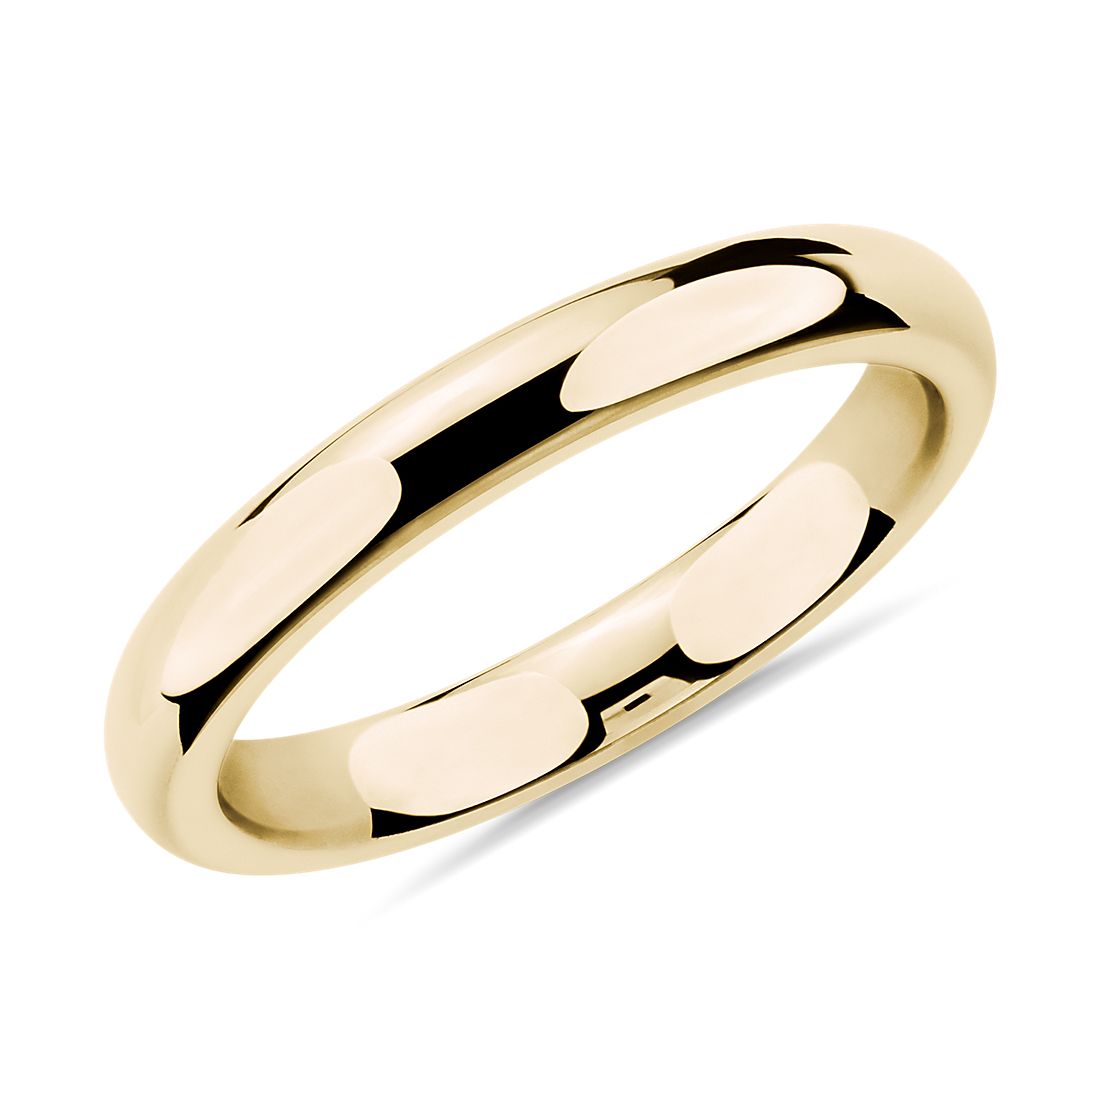 Mens 14K Yellow Gold 3mm Light Comfort Fit Domed Wedding Band Ring